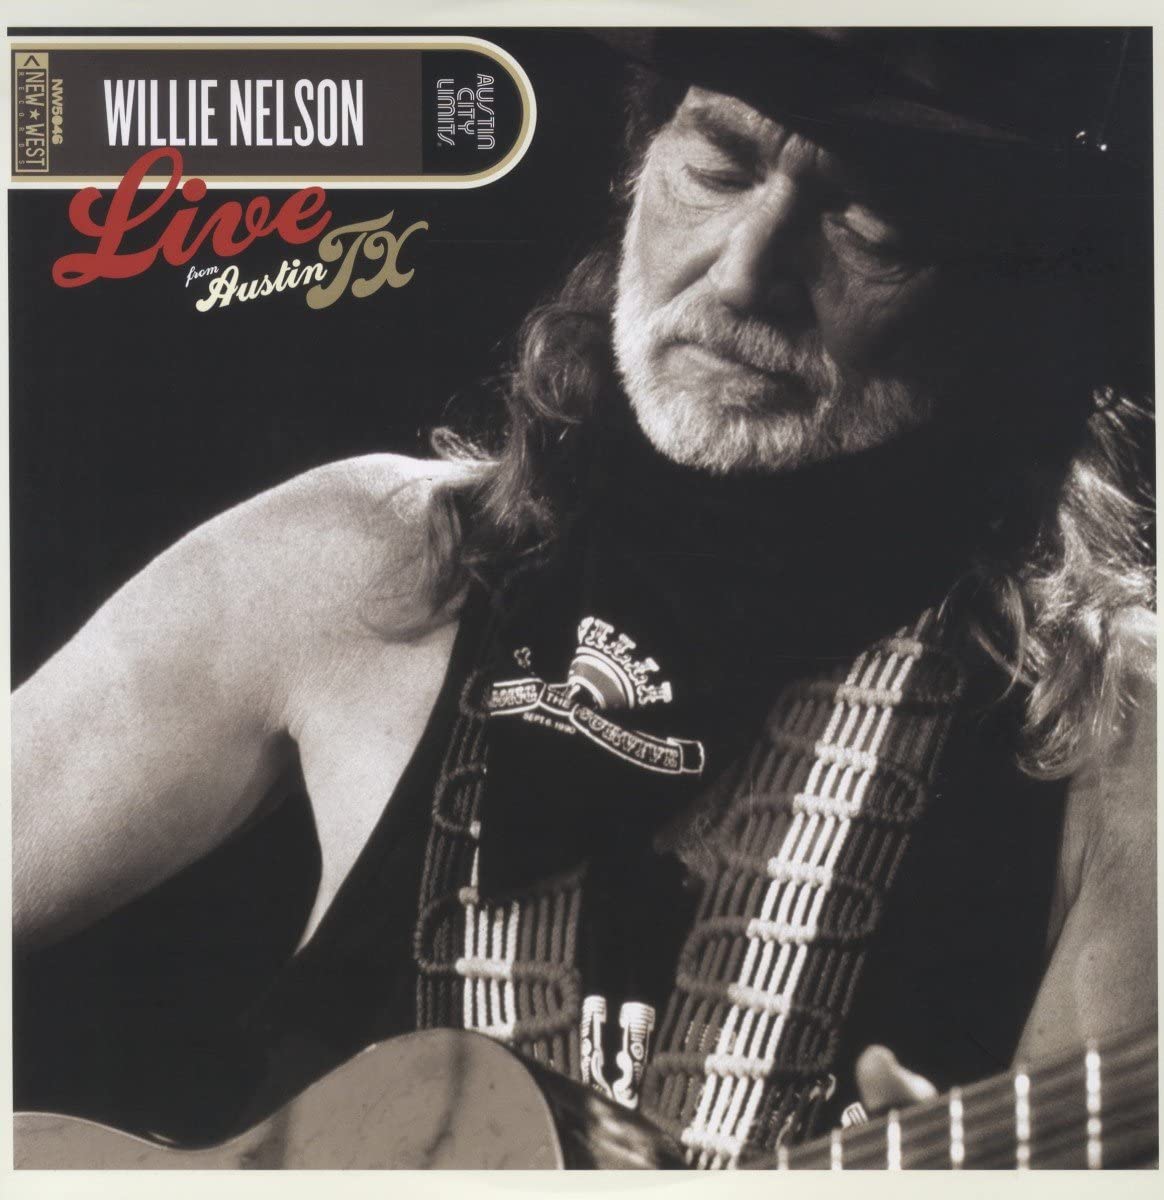 Nelson, Willie/Live From Austin TX [LP]